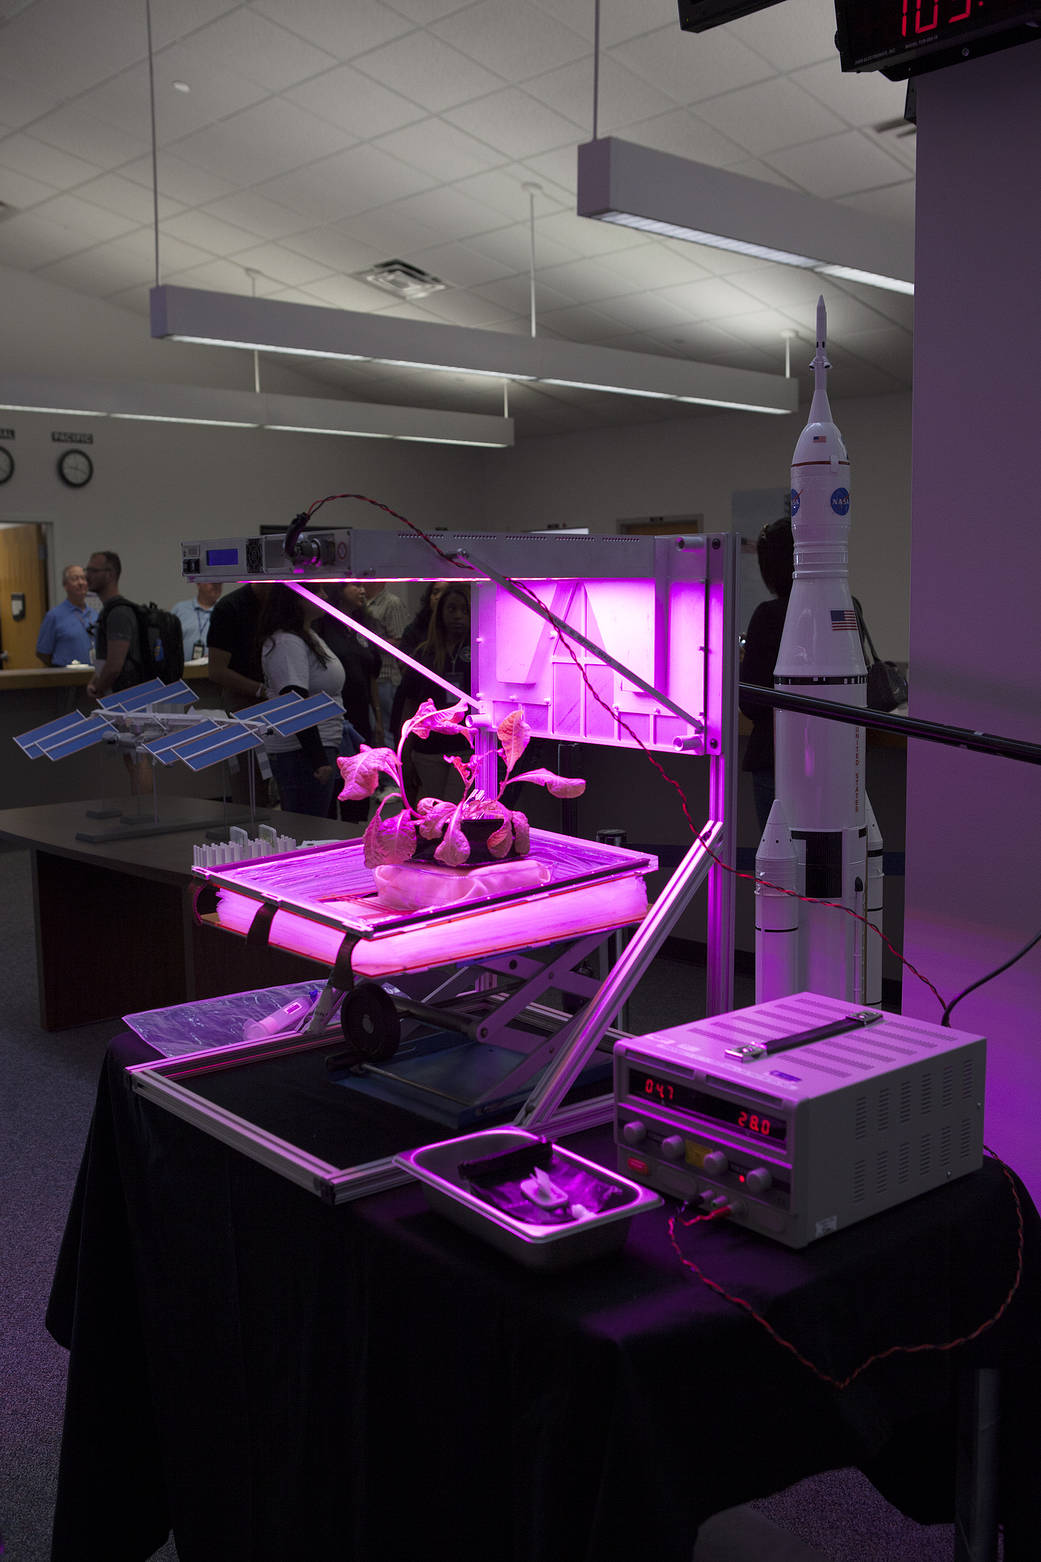 The International Space Station's Vegetable Production System "Veggie" experiment is on display in the News Center at NASA's Ken